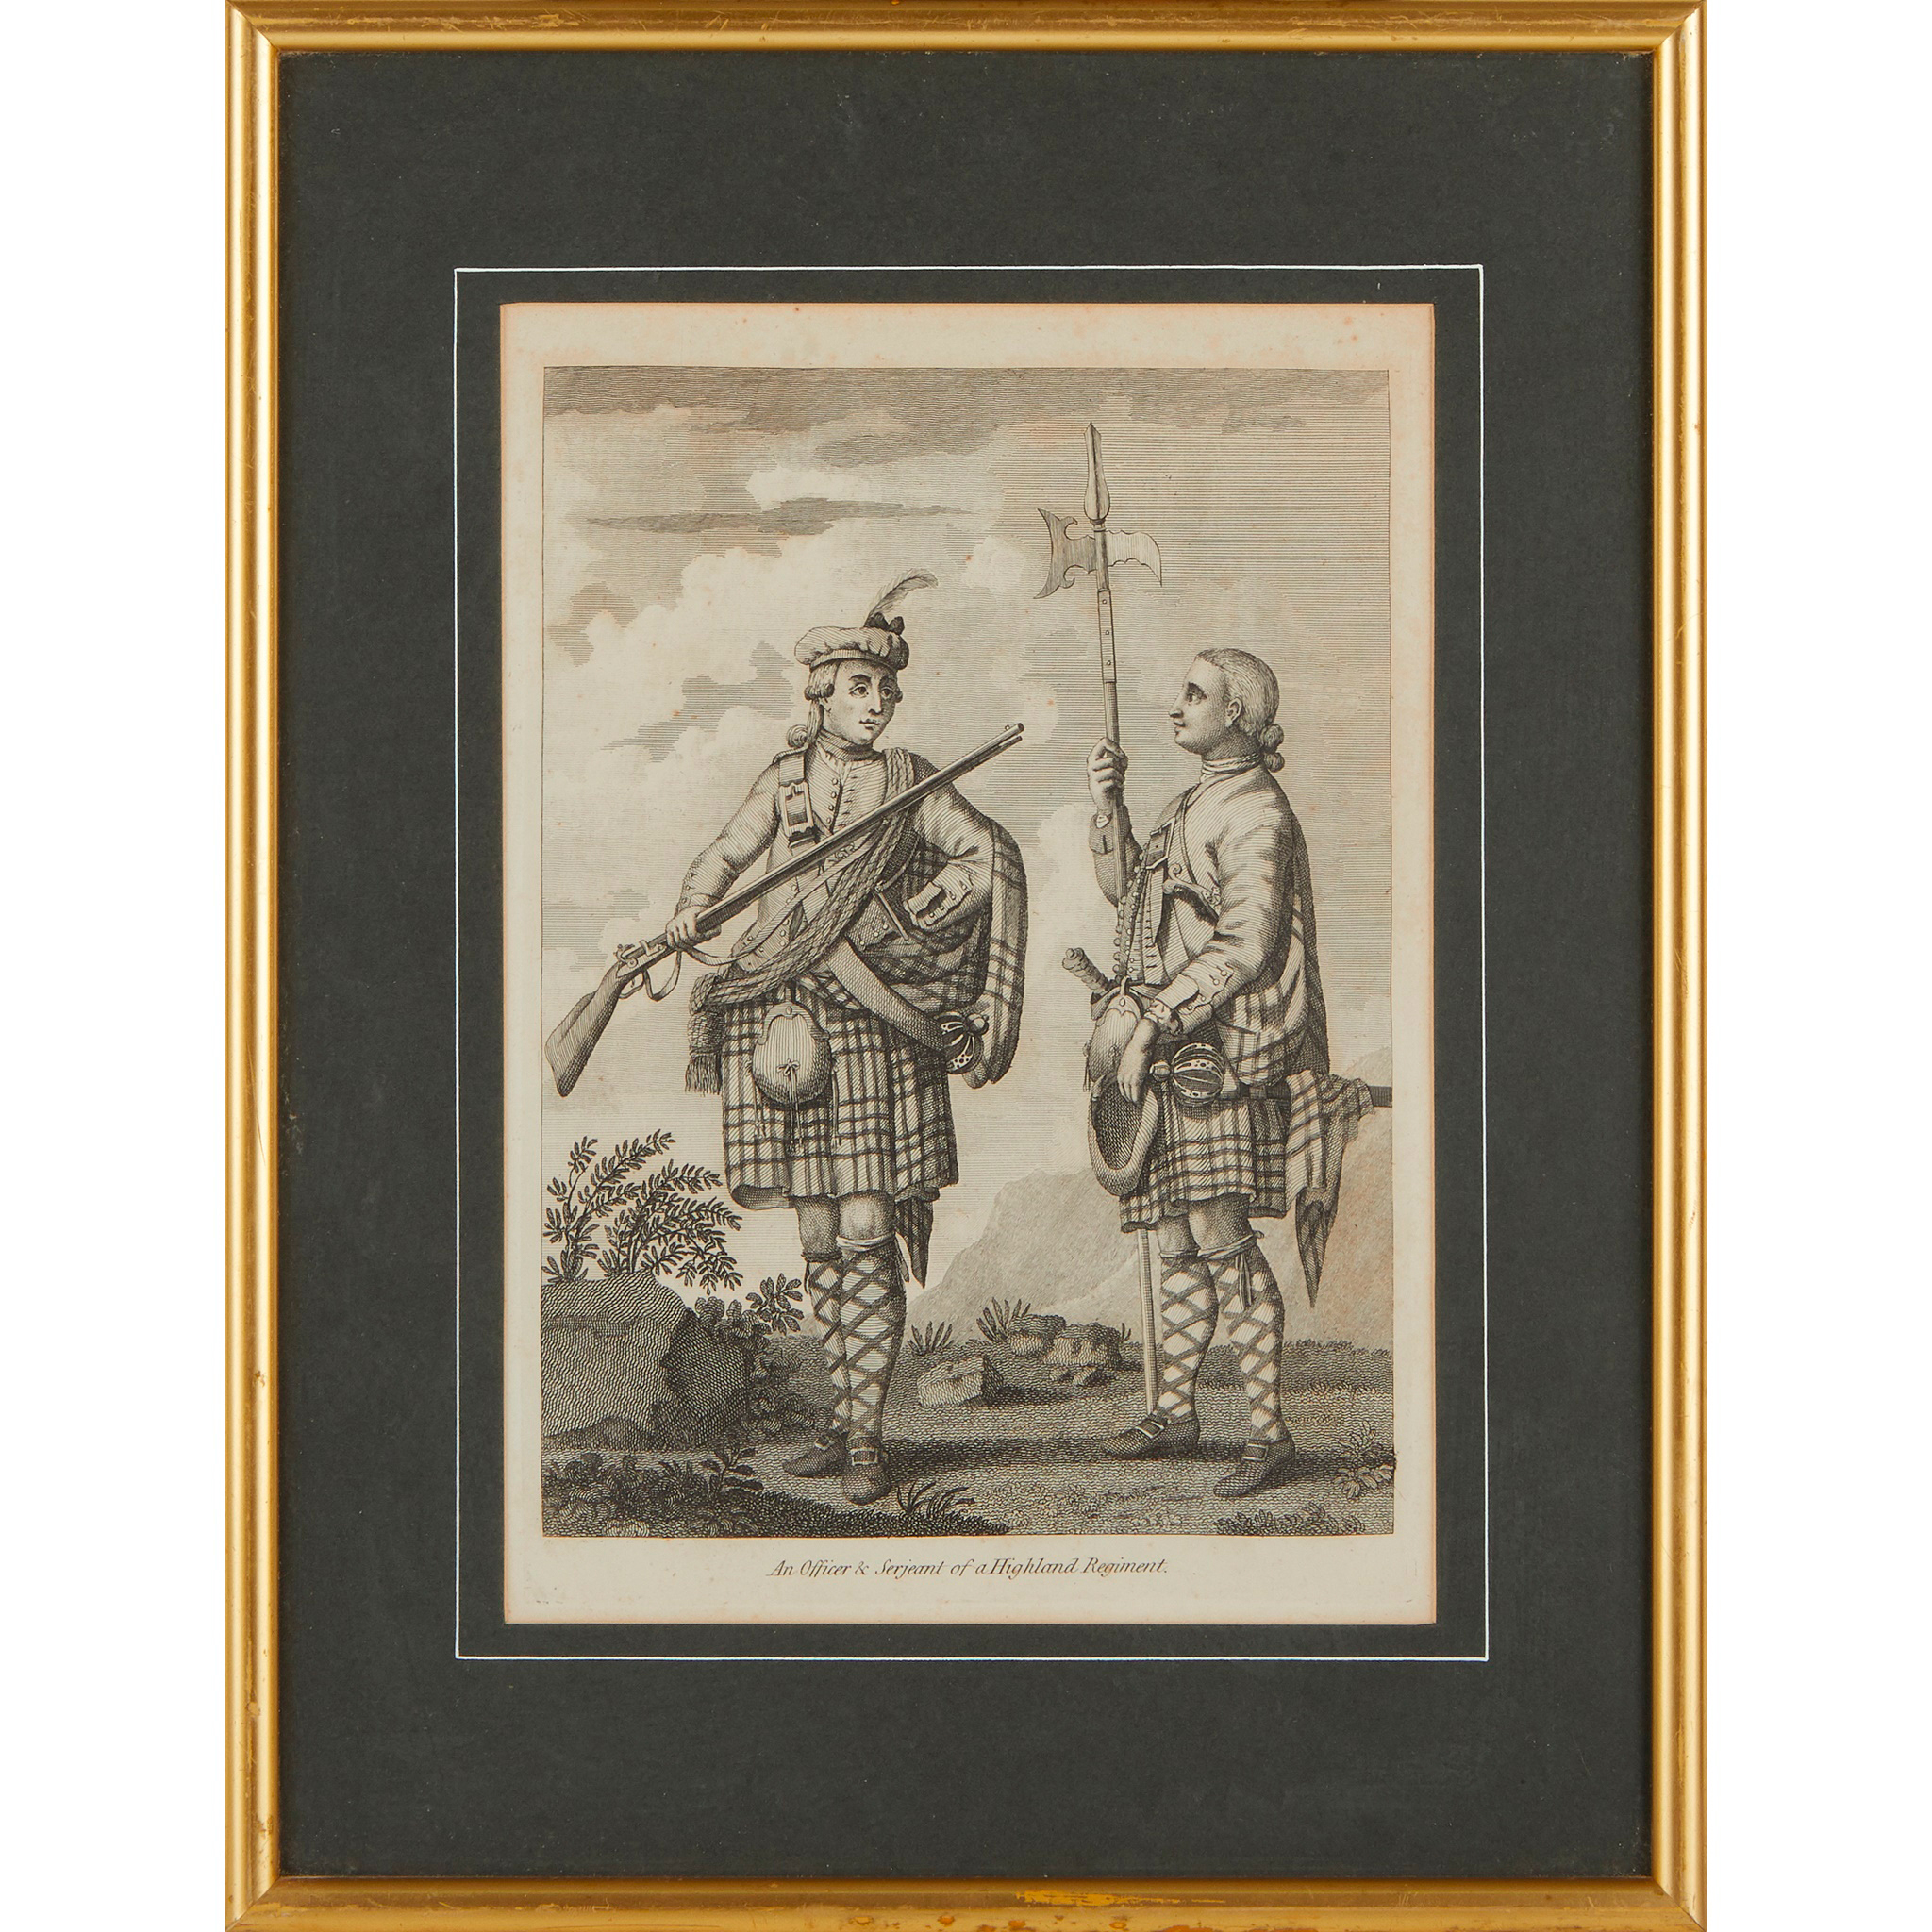 Two framed 18th century engravings of Highland soldier